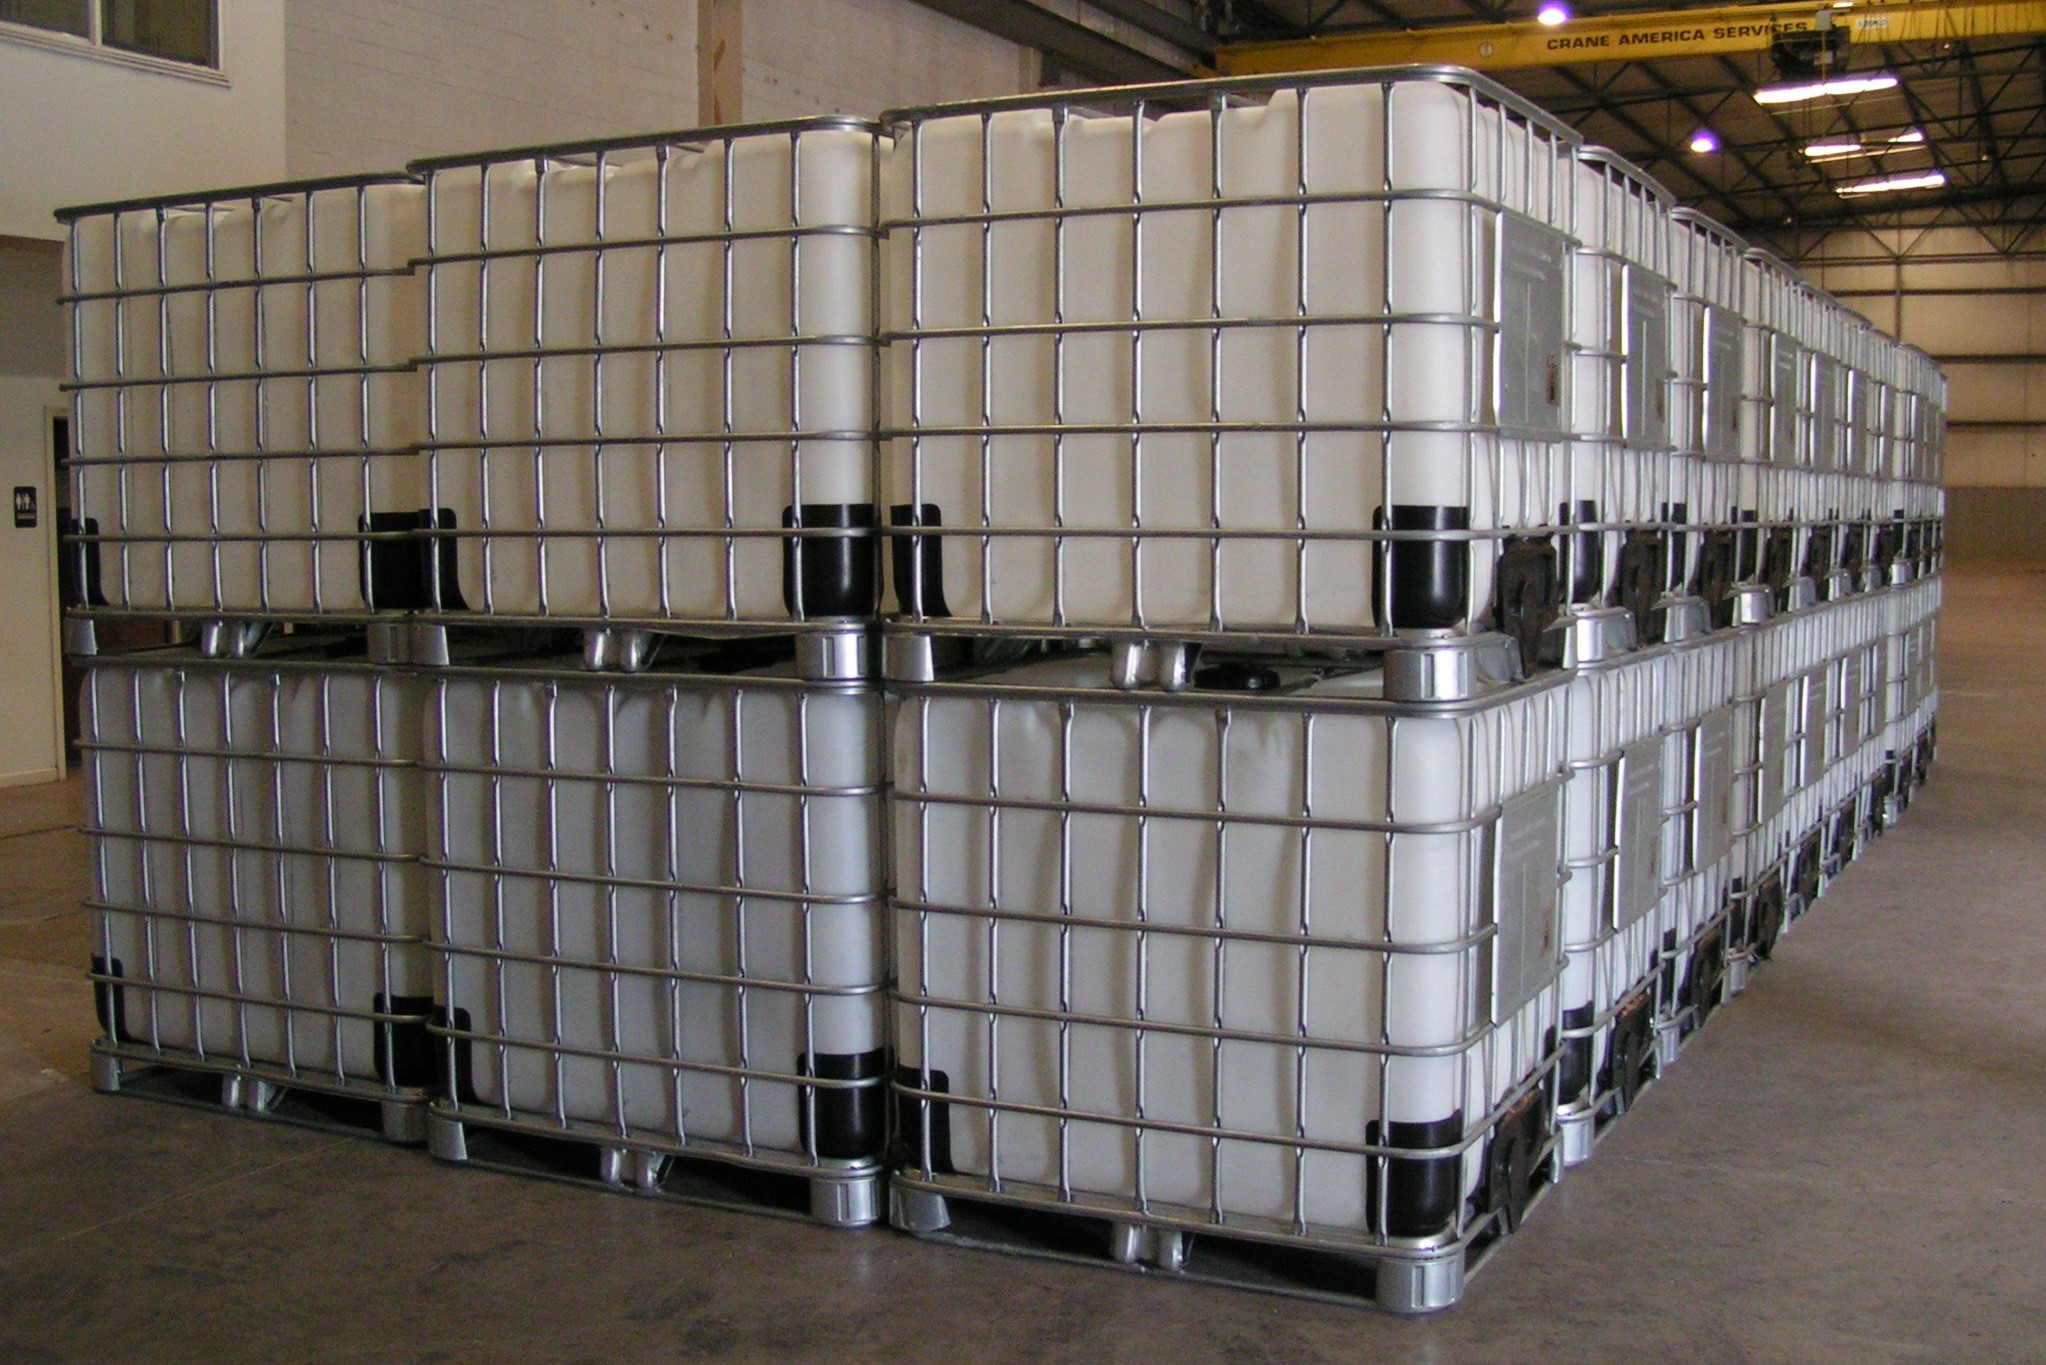 More Notes on Totes: Folding Bulk Containers, Industrial Totes, and Bins